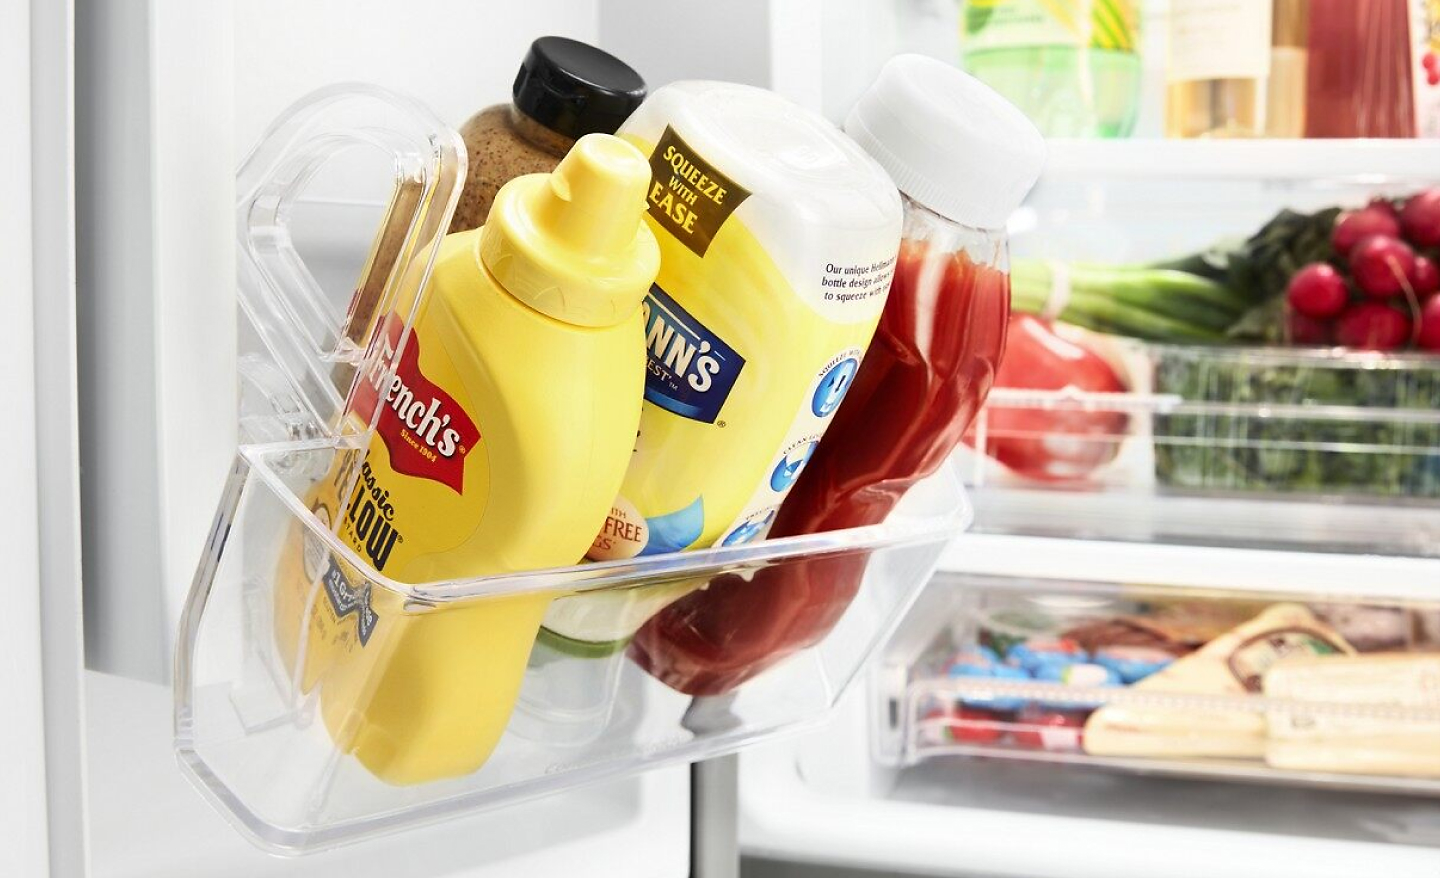 https://kitchenaid-h.assetsadobe.com/is/image/content/dam/business-unit/whirlpoolv2/en-us/marketing-content/site-assets/page-content/oc-articles/how-to-organize-a-refrigerator/How_to_Organize_a_Refer_Image%208.jpg?fmt=png-alpha&qlt=85,0&resMode=sharp2&op_usm=1.75,0.3,2,0&scl=1&constrain=fit,1